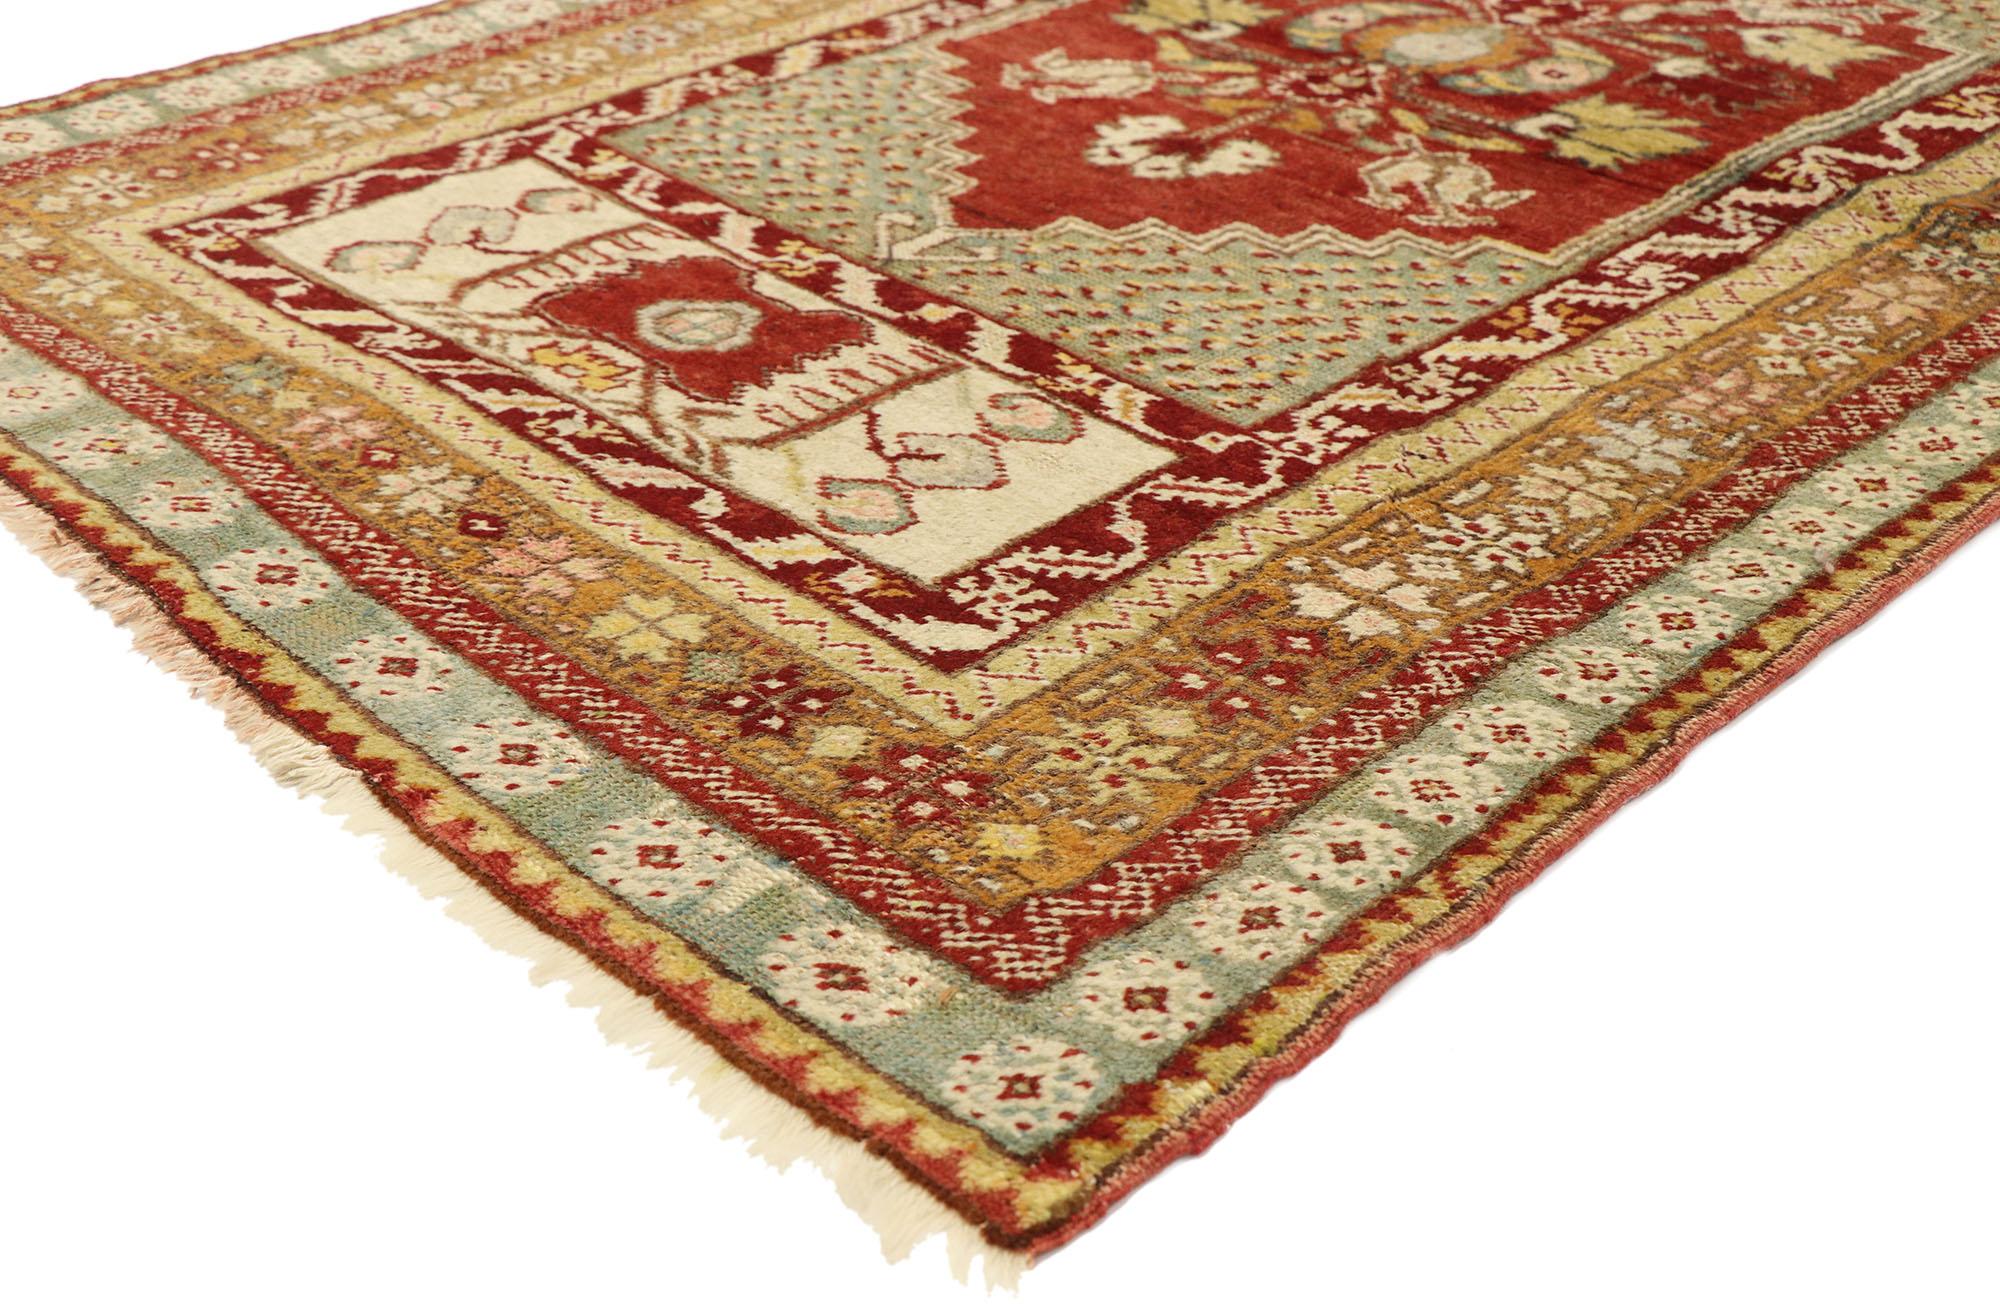 73644, vintage Turkish Oushak rug with traditional style 03'00 X 05'06.? Warm and inviting with a timeless design, this hand knotted wool vintage Turkish Oushak rug beautifully embodies a traditional style. The stepped cut-out field displays a